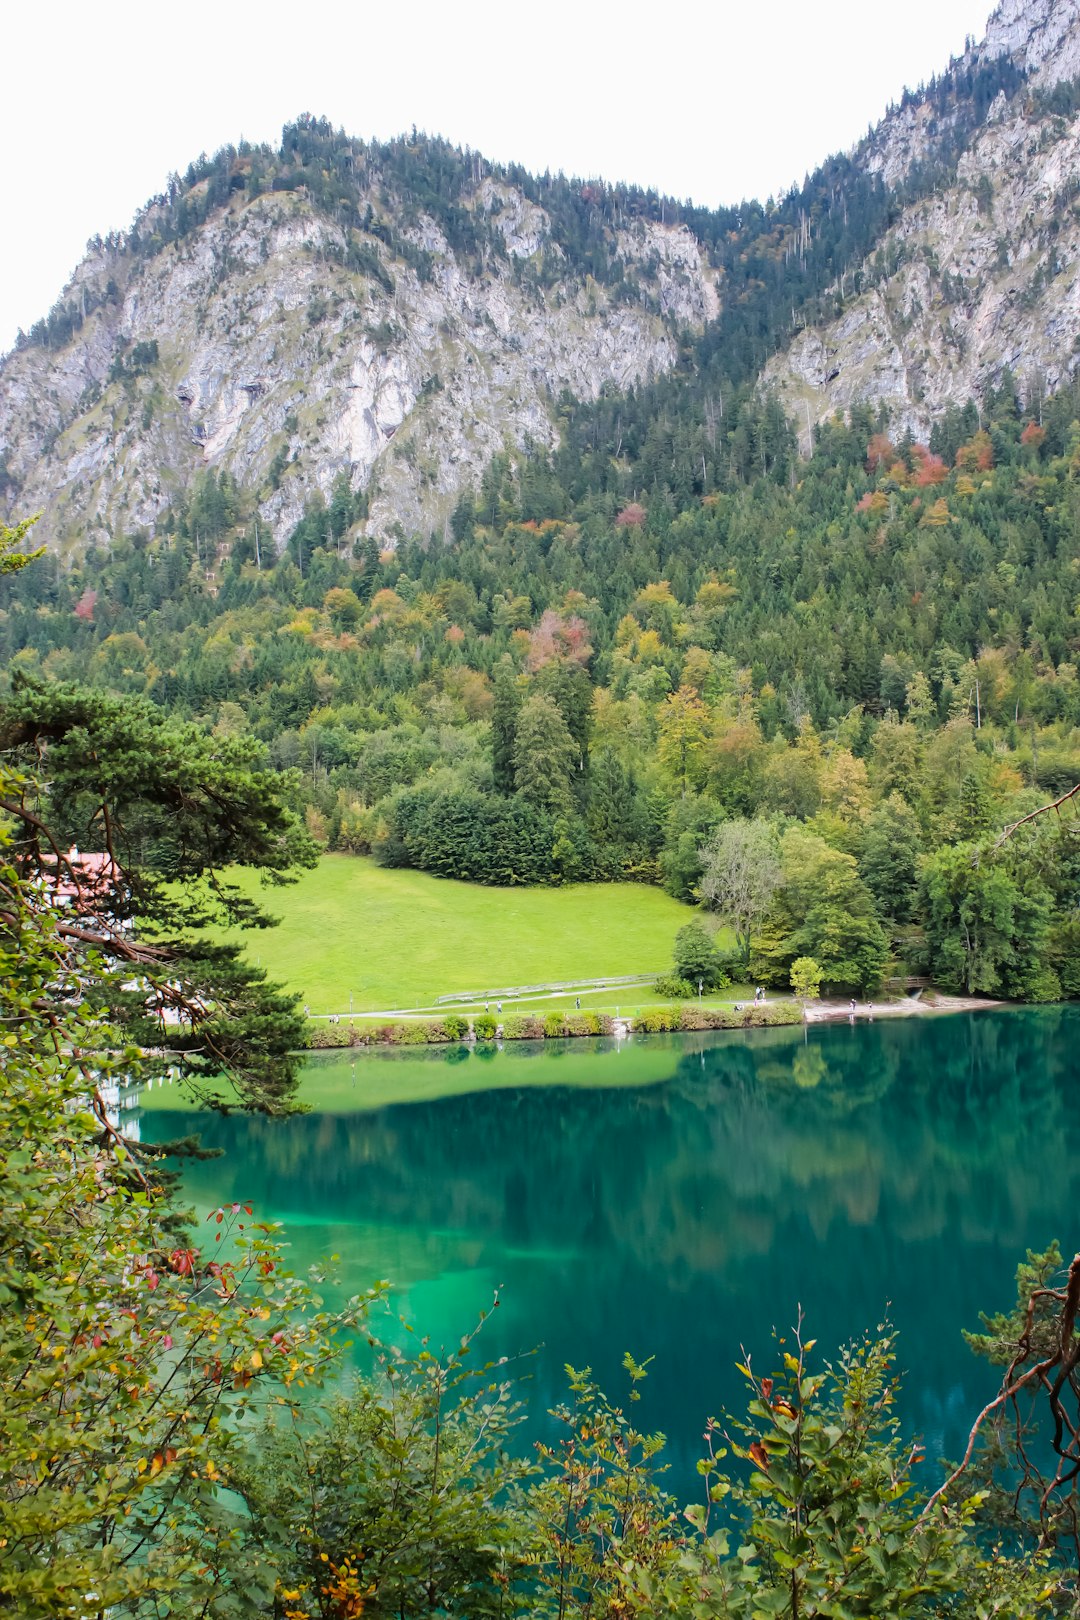 Nature reserve photo spot Forggensee Alpsee